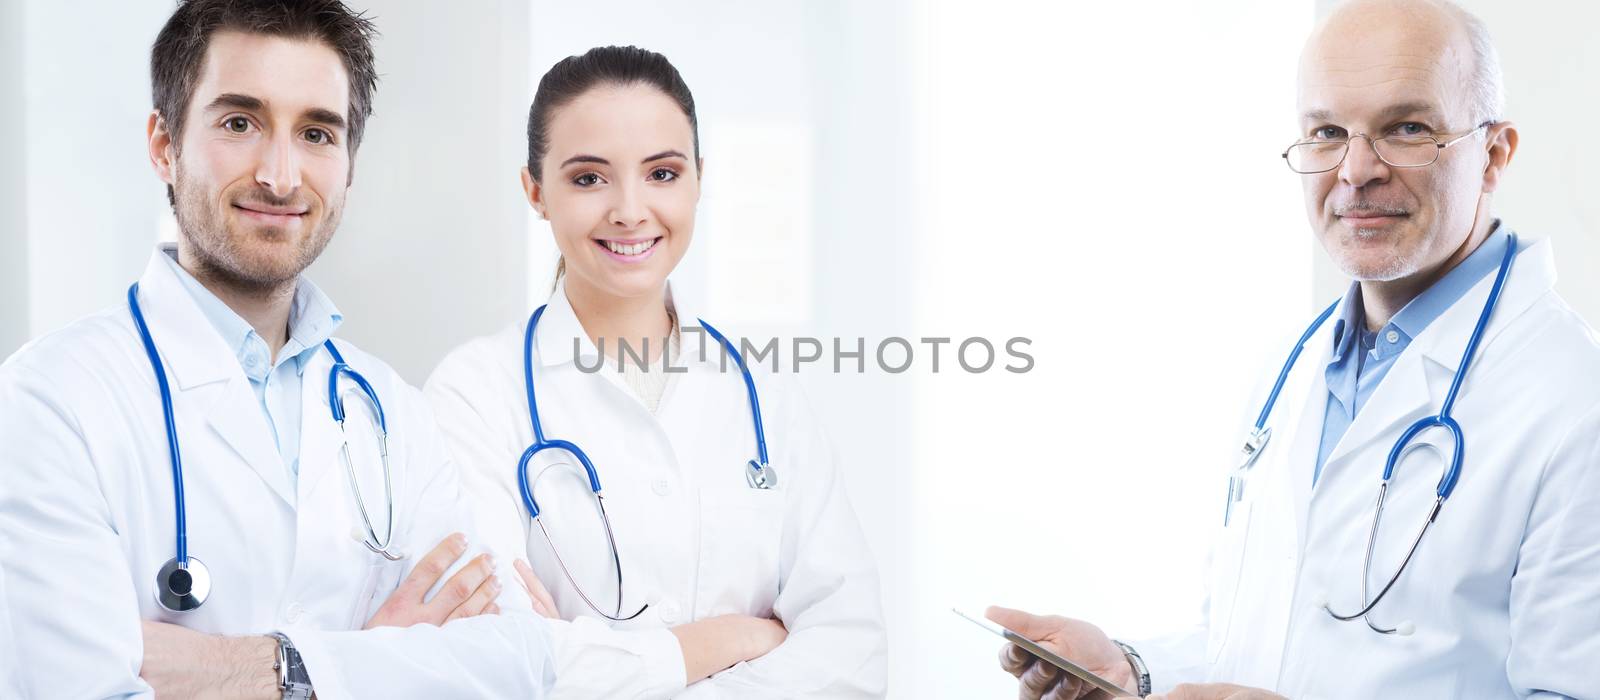 Professional doctor at hospital with crossed arms